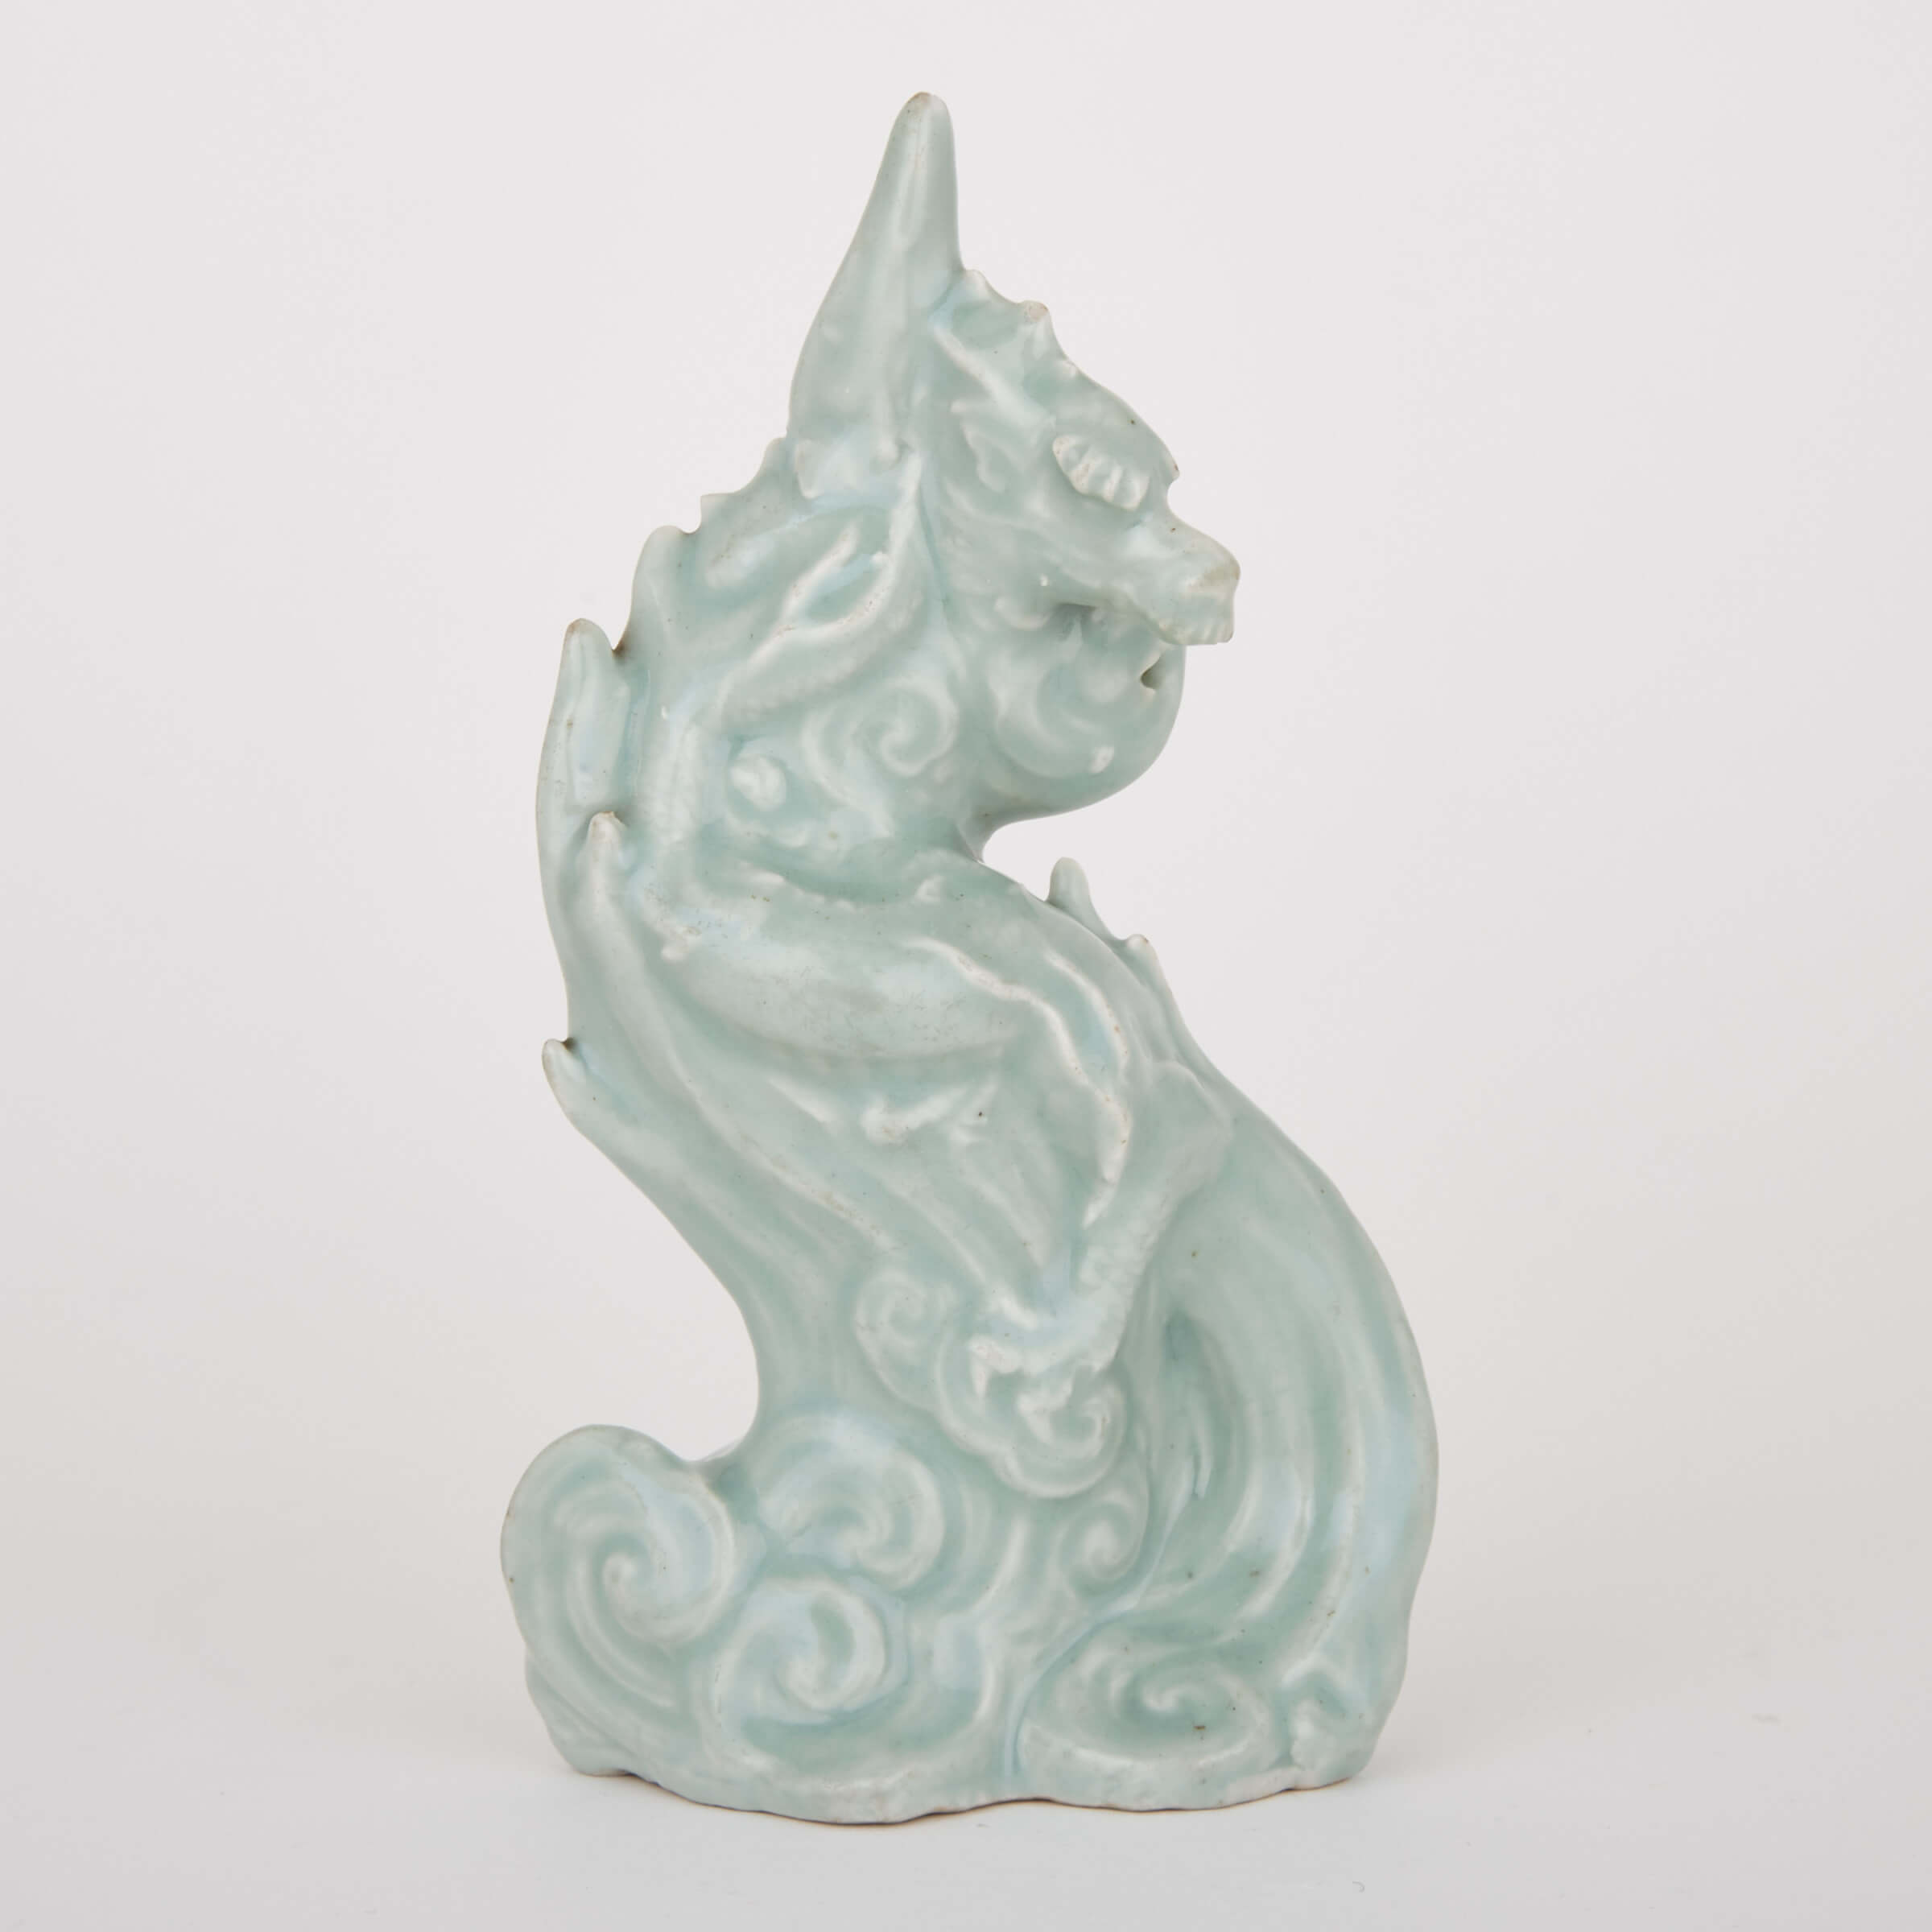 A Rare and Finely Moulded Celadon Glazed Porcelain Dragon, 19th Century